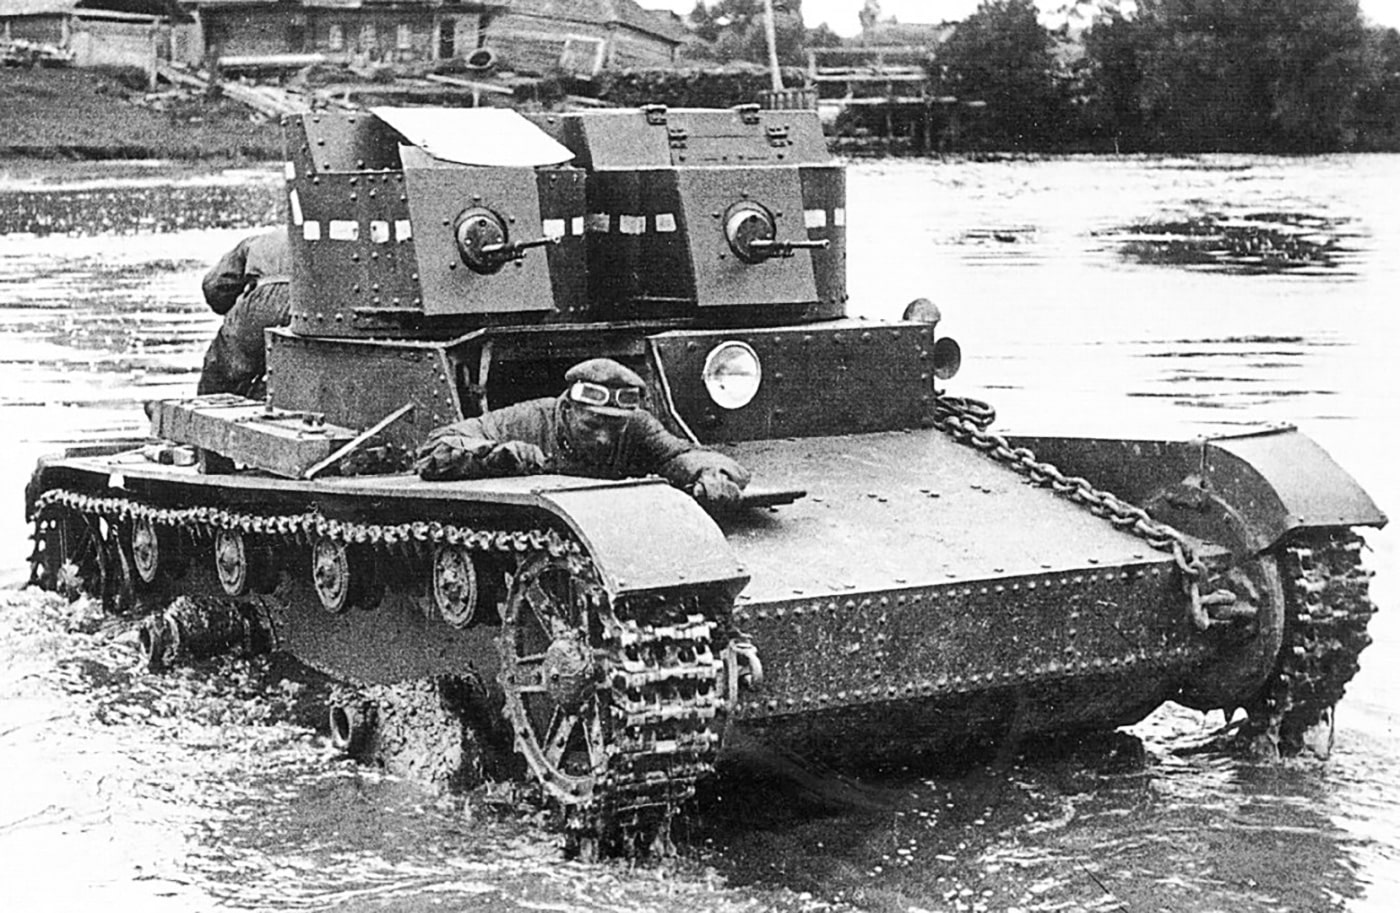 dual turret t-26 tank in river near moscow